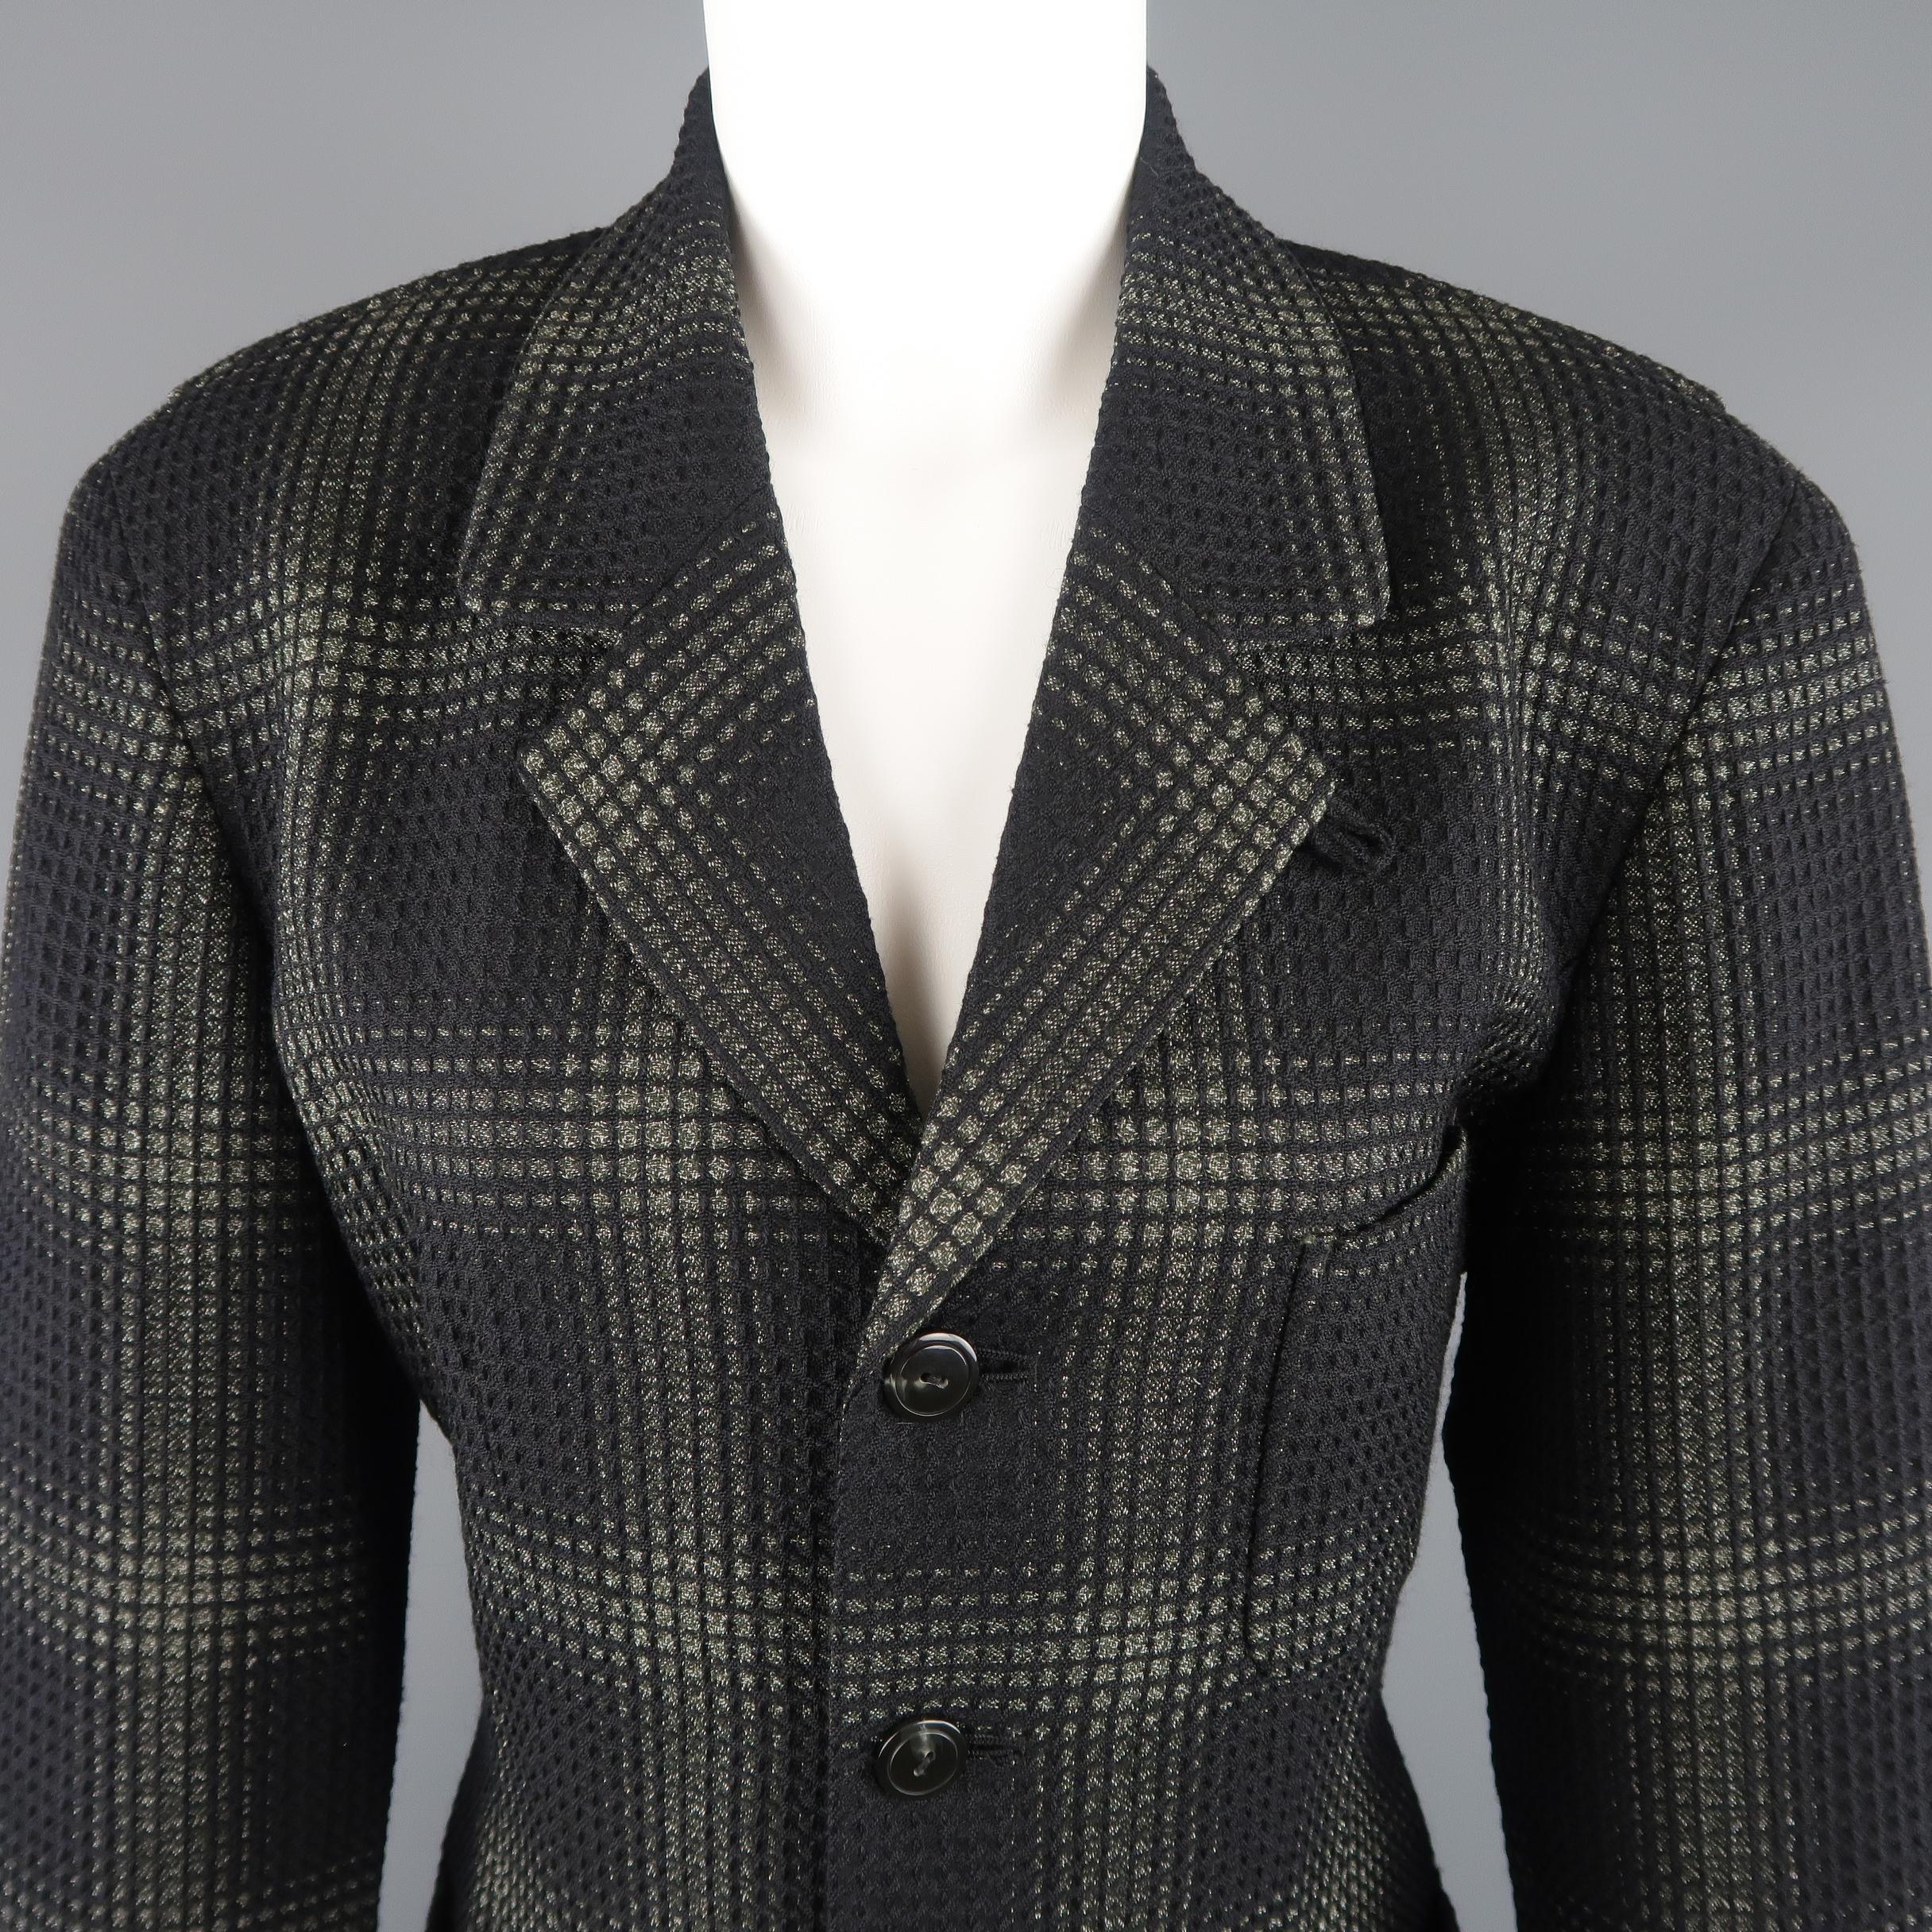 Vintage MATSUDA sport coat jacket comes in black textured wool silk blend fabric with an all over moss green plaid pattern, four button front, pointed lapel, and patch pockets. Made in Japan.
 
Good Pre-Owned Condition.
Marked:(no size)
